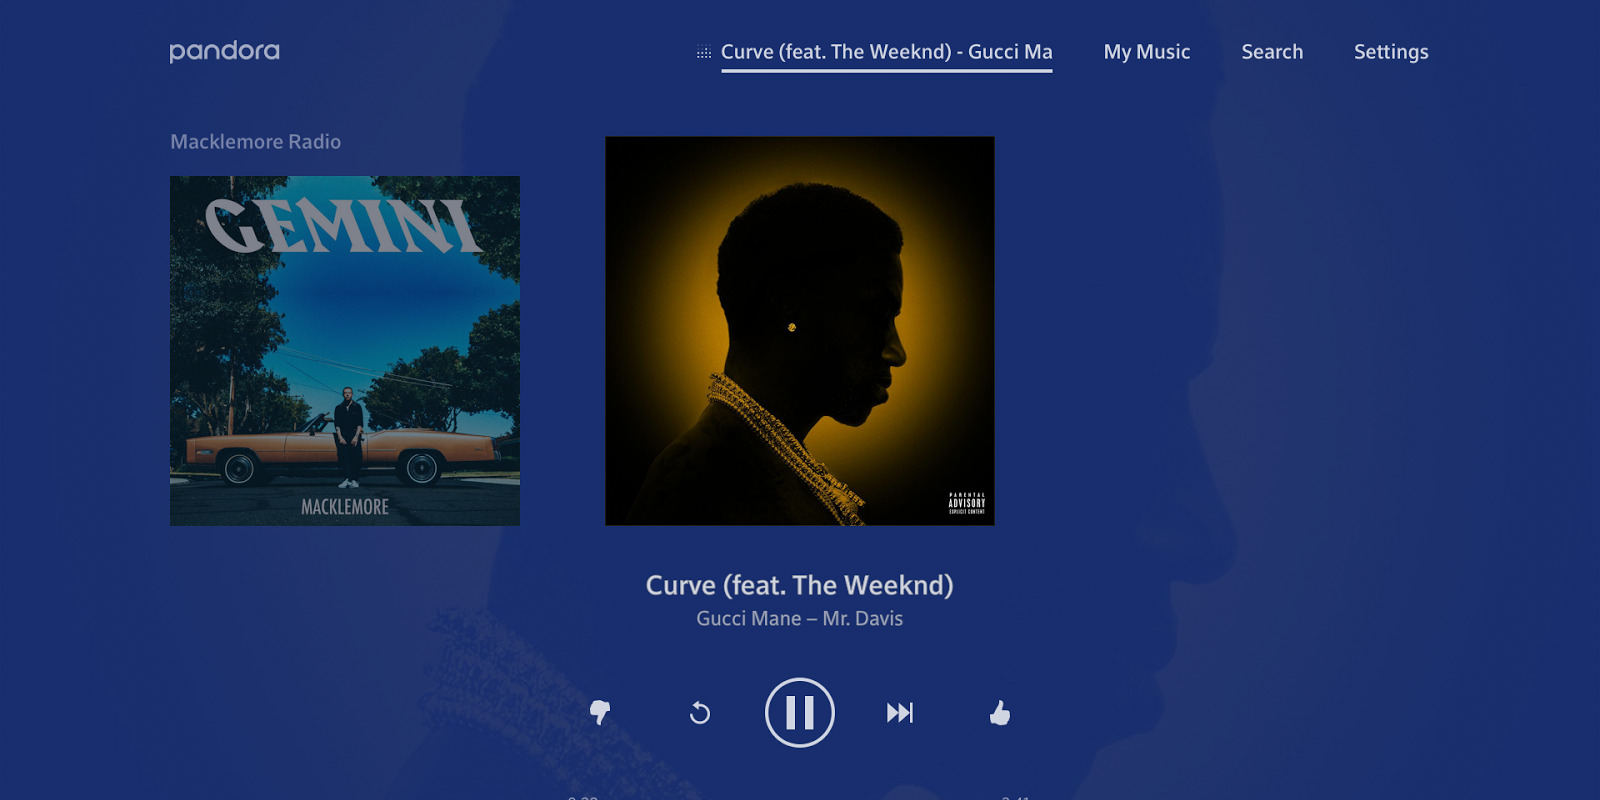 How To Download Pandora On Android